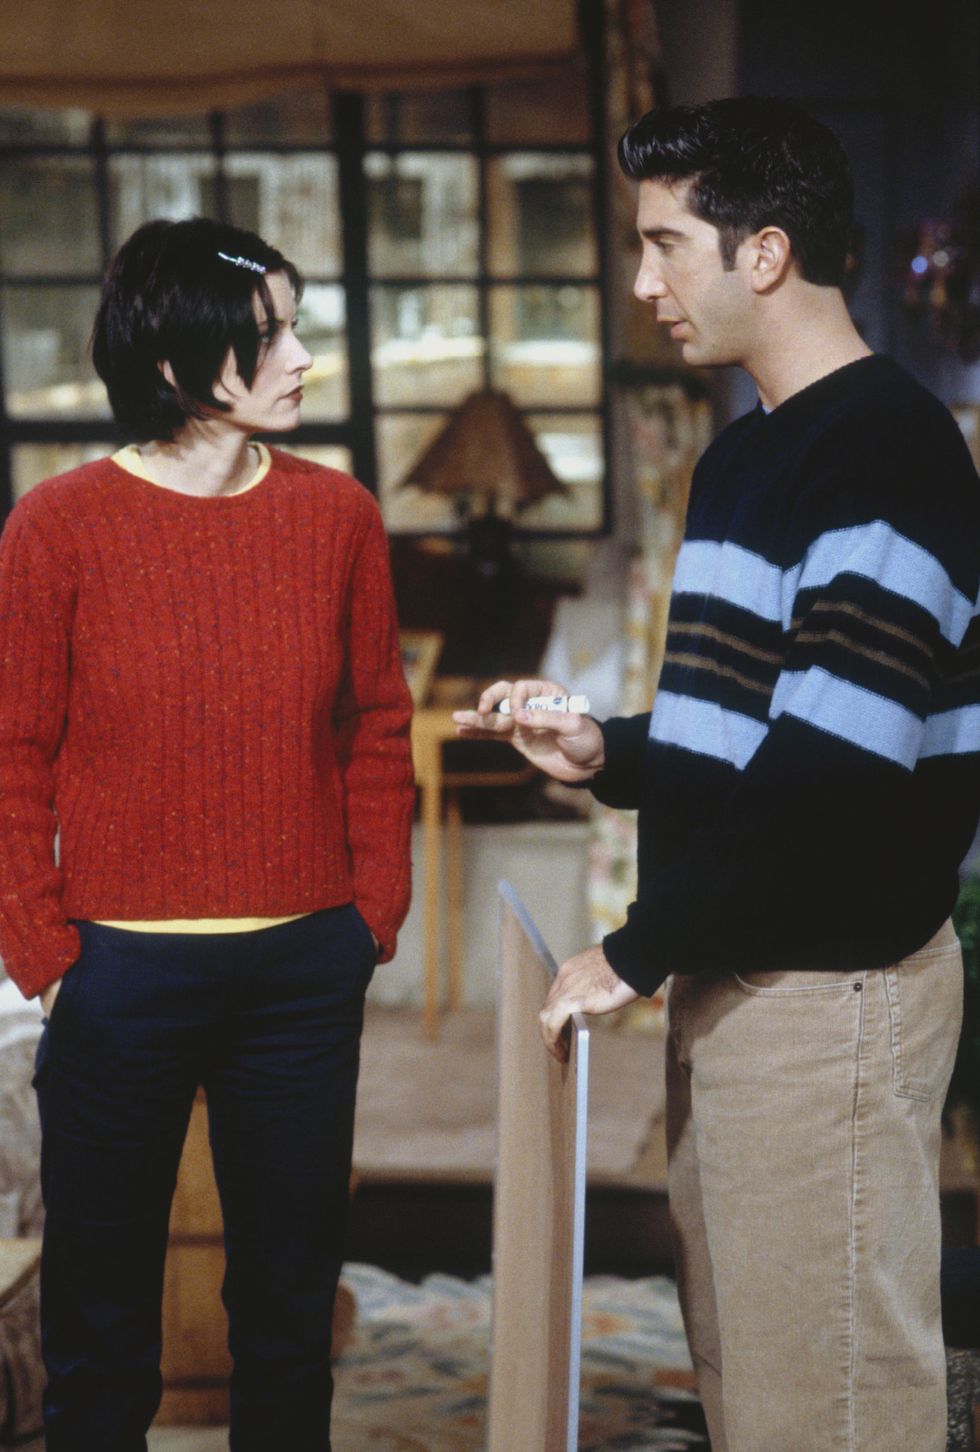 FRIENDS -- &quot;The One with the Embryos&quot; Episode 12 -- Pictured: (l-r) Courteney Cox as Monica Geller, David Schwimmer as Ross Geller -- Photo by: J. Delvalle/NBCU Photo Bank 